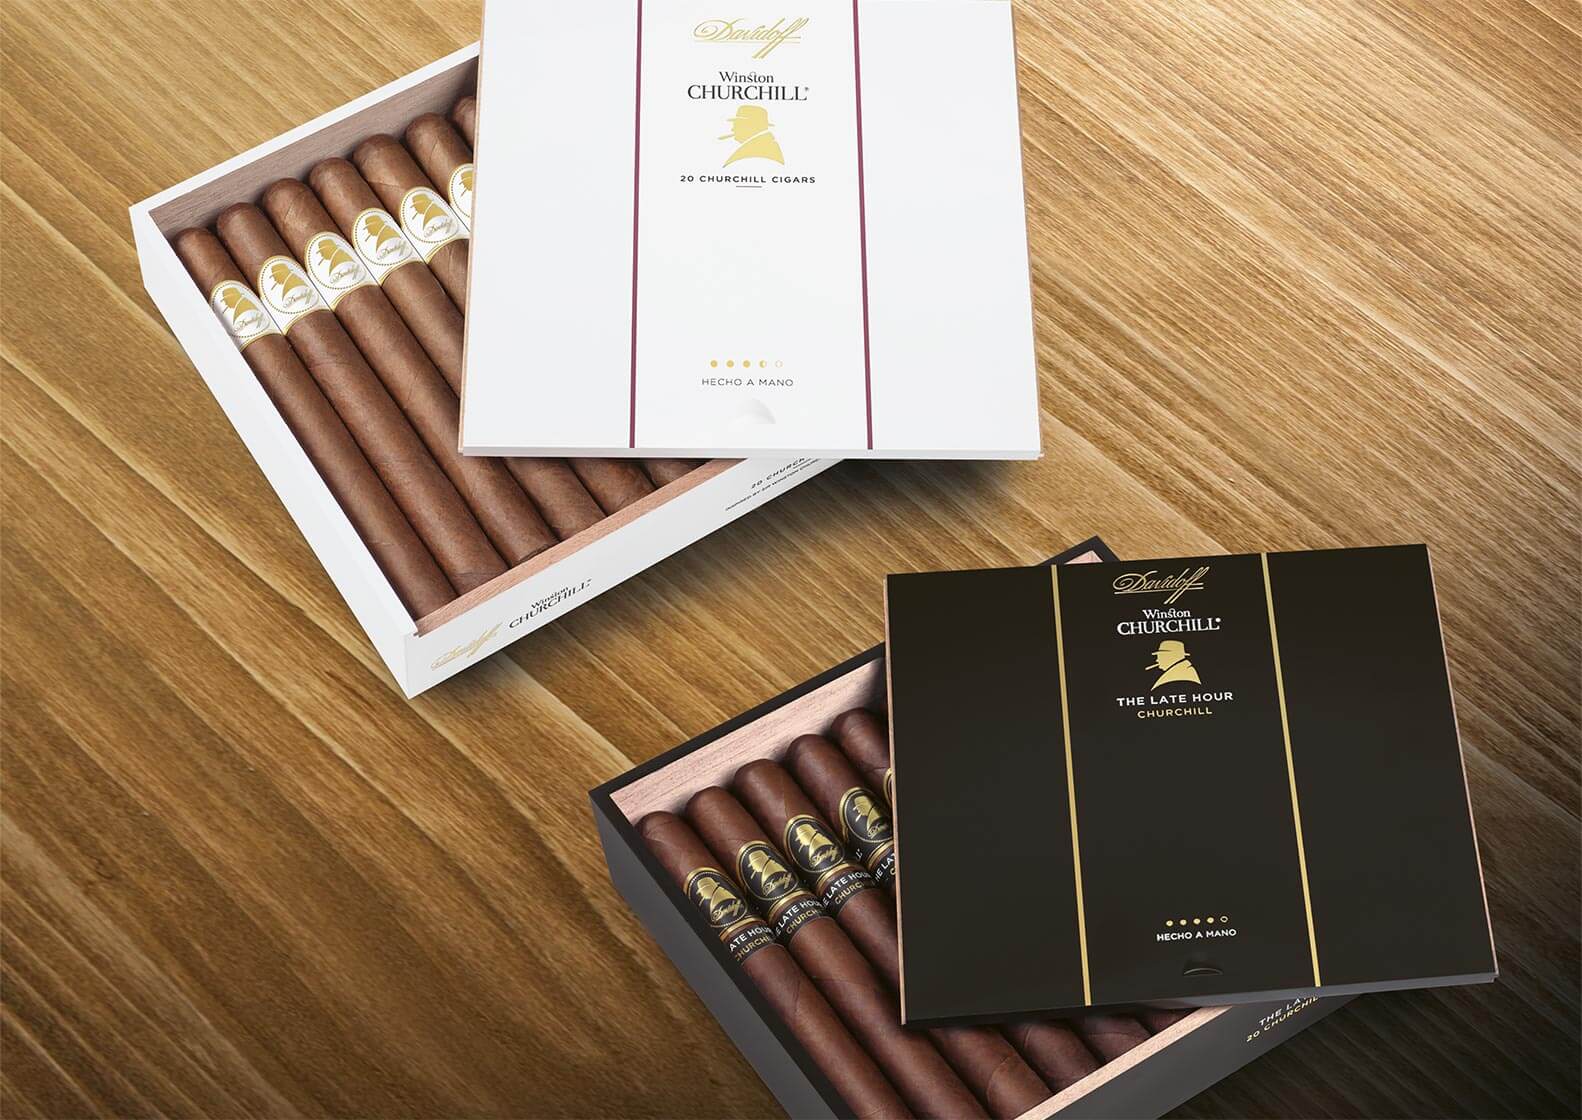 Open Davidoff Winston Churchill Original Collection and Late Hour Collection Cigar Boxes on a wooden underground